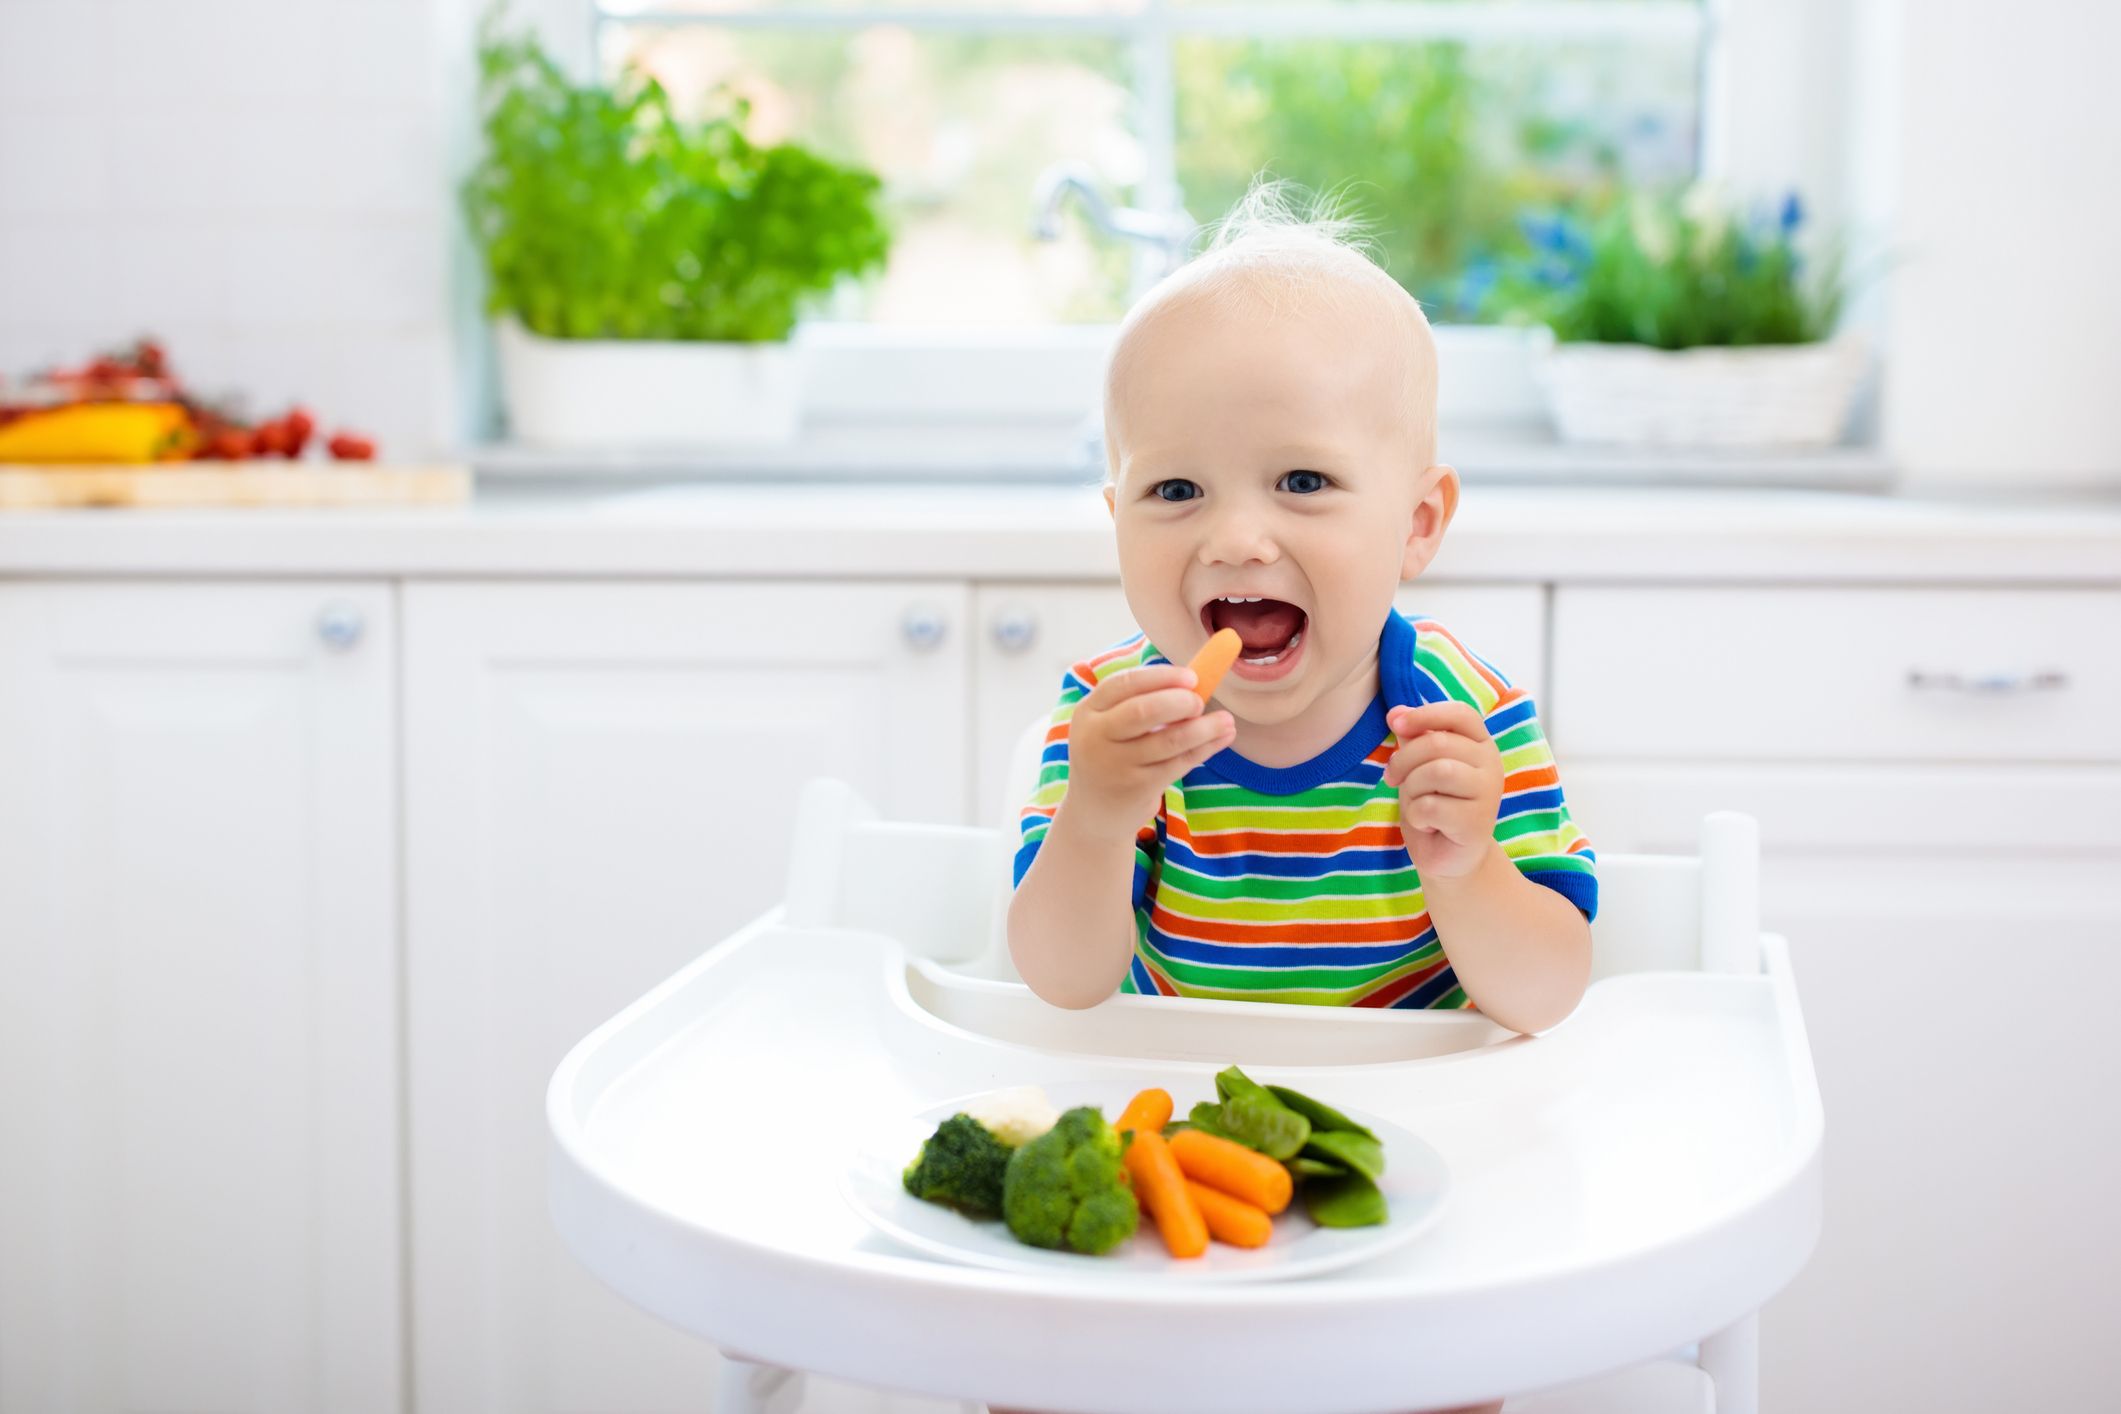 Baby-led Weaning vs. Spoon-feeding: What Science Actually Says